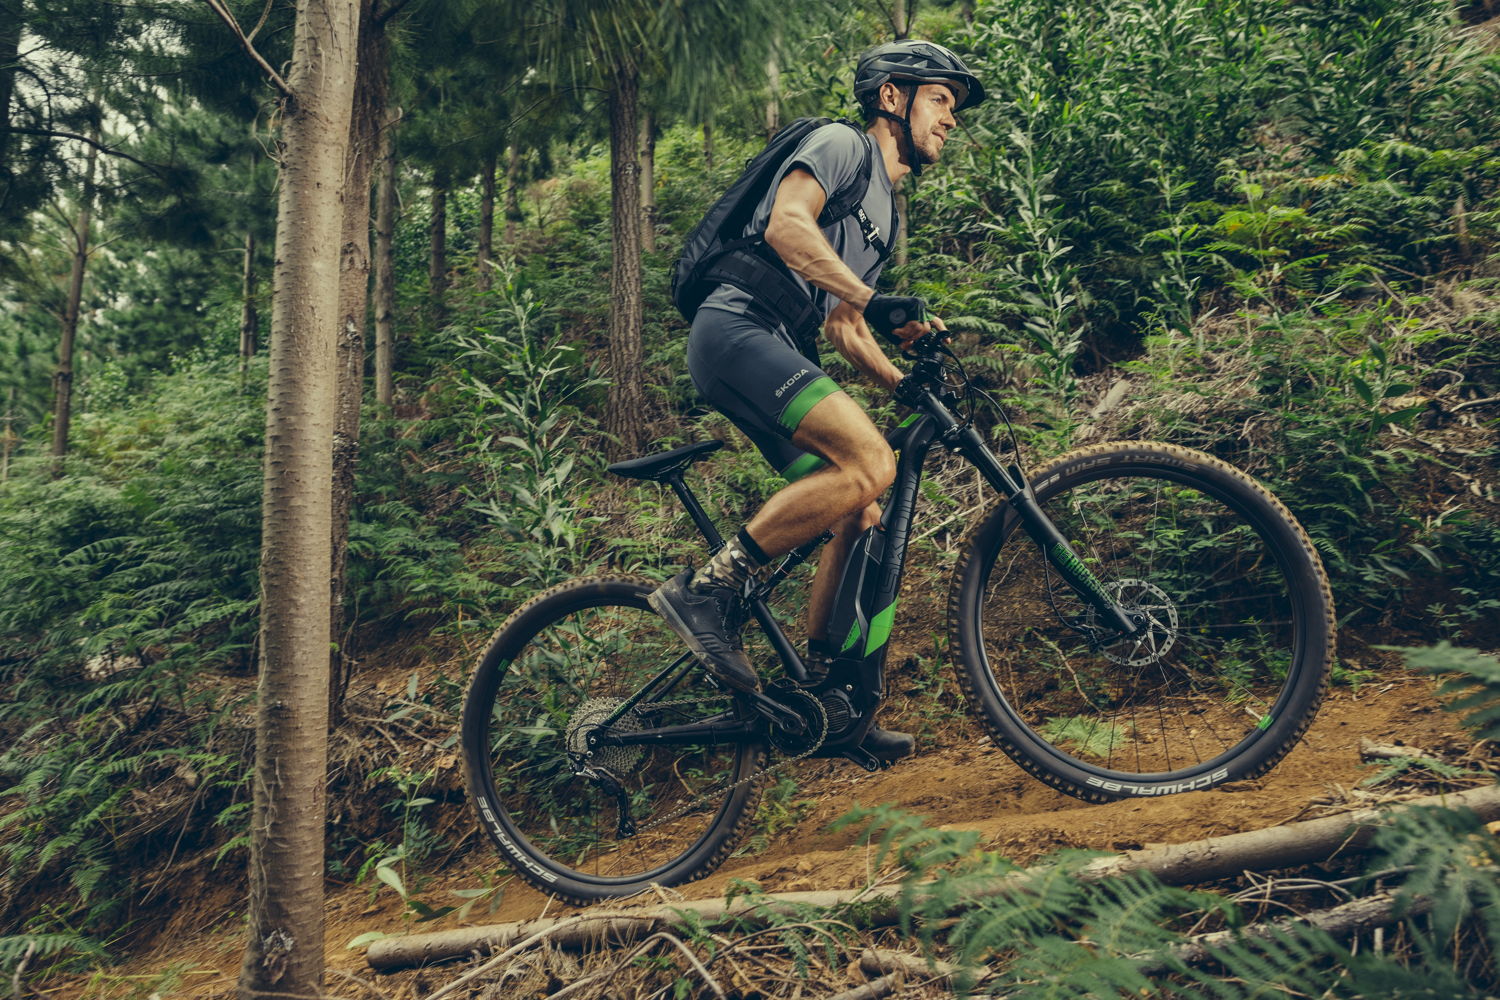 The EMTB FULL is a full-suspension e-mountain bike,
while its sister model EMTB is a hardtail version with a
front suspension fork. Both top models use the powerful
Shimano drive STEPS E7000 as well as the highperformance down-tube battery STEPS BT-E8010 with a
capacity of 504Wh.